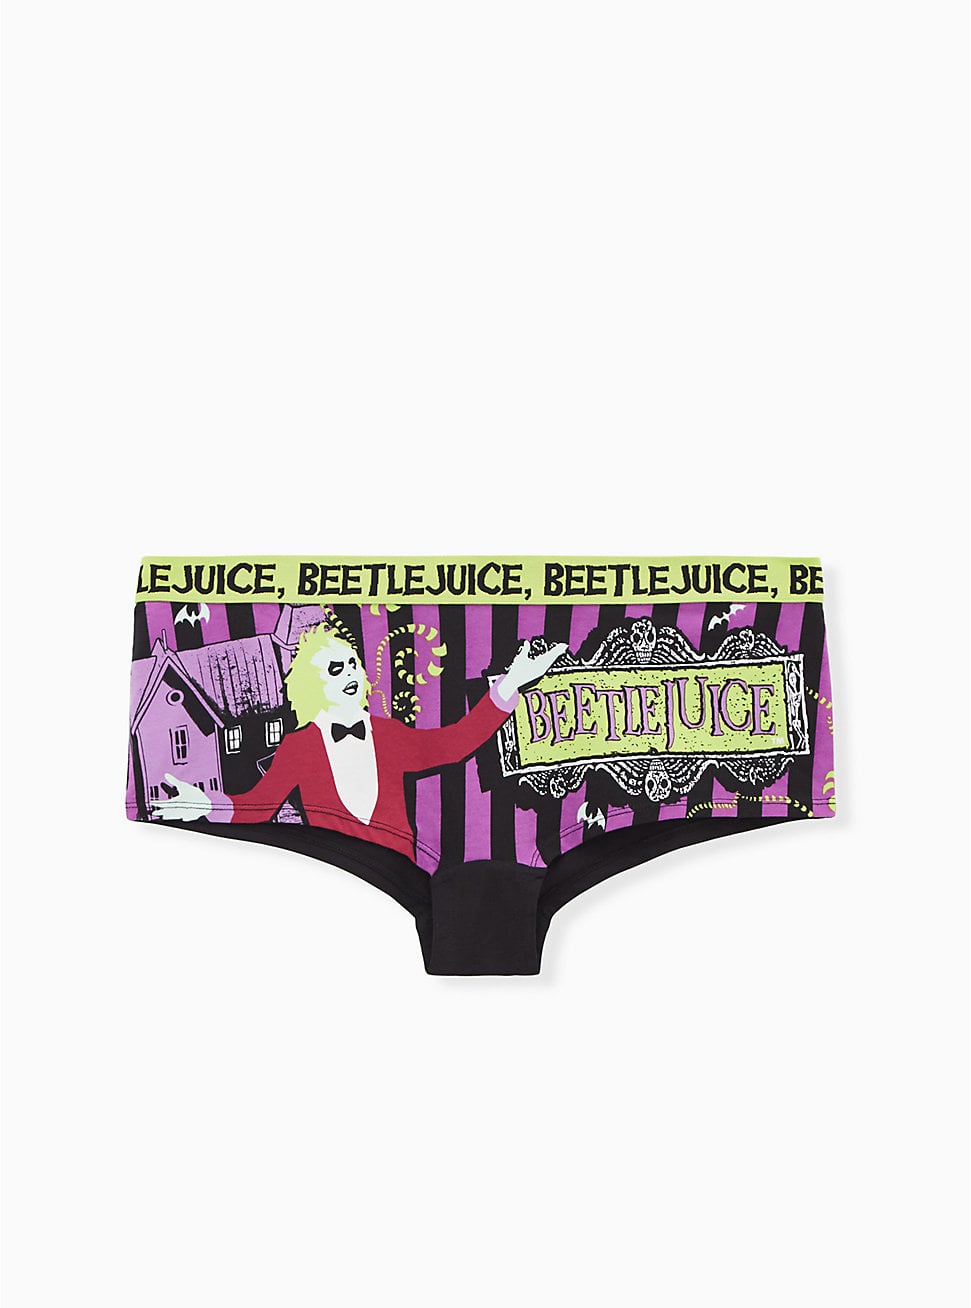 Halloweentown University Boyshort Underwear, These Halloween Undies Will  Cause Double, Double, Toil, and Trouble in the Bedroom